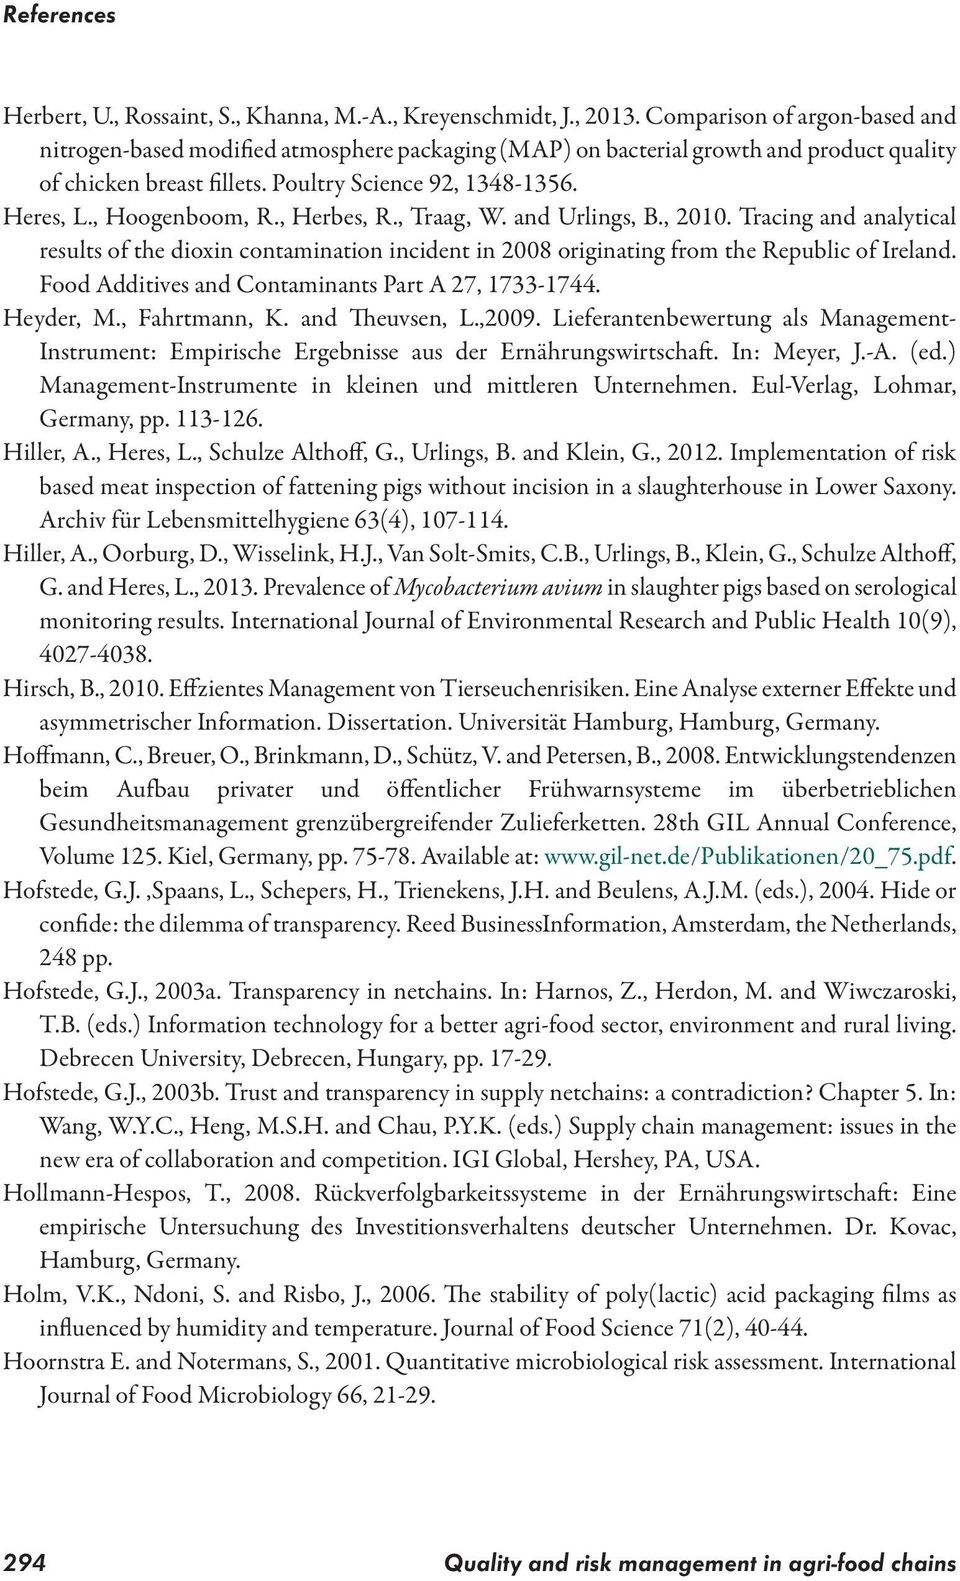 , Hoogenboom, R., Herbes, R., Traag, W. and Urlings, B., 2010. Tracing and analytical results of the dioxin contamination incident in 2008 originating from the Republic of Ireland.